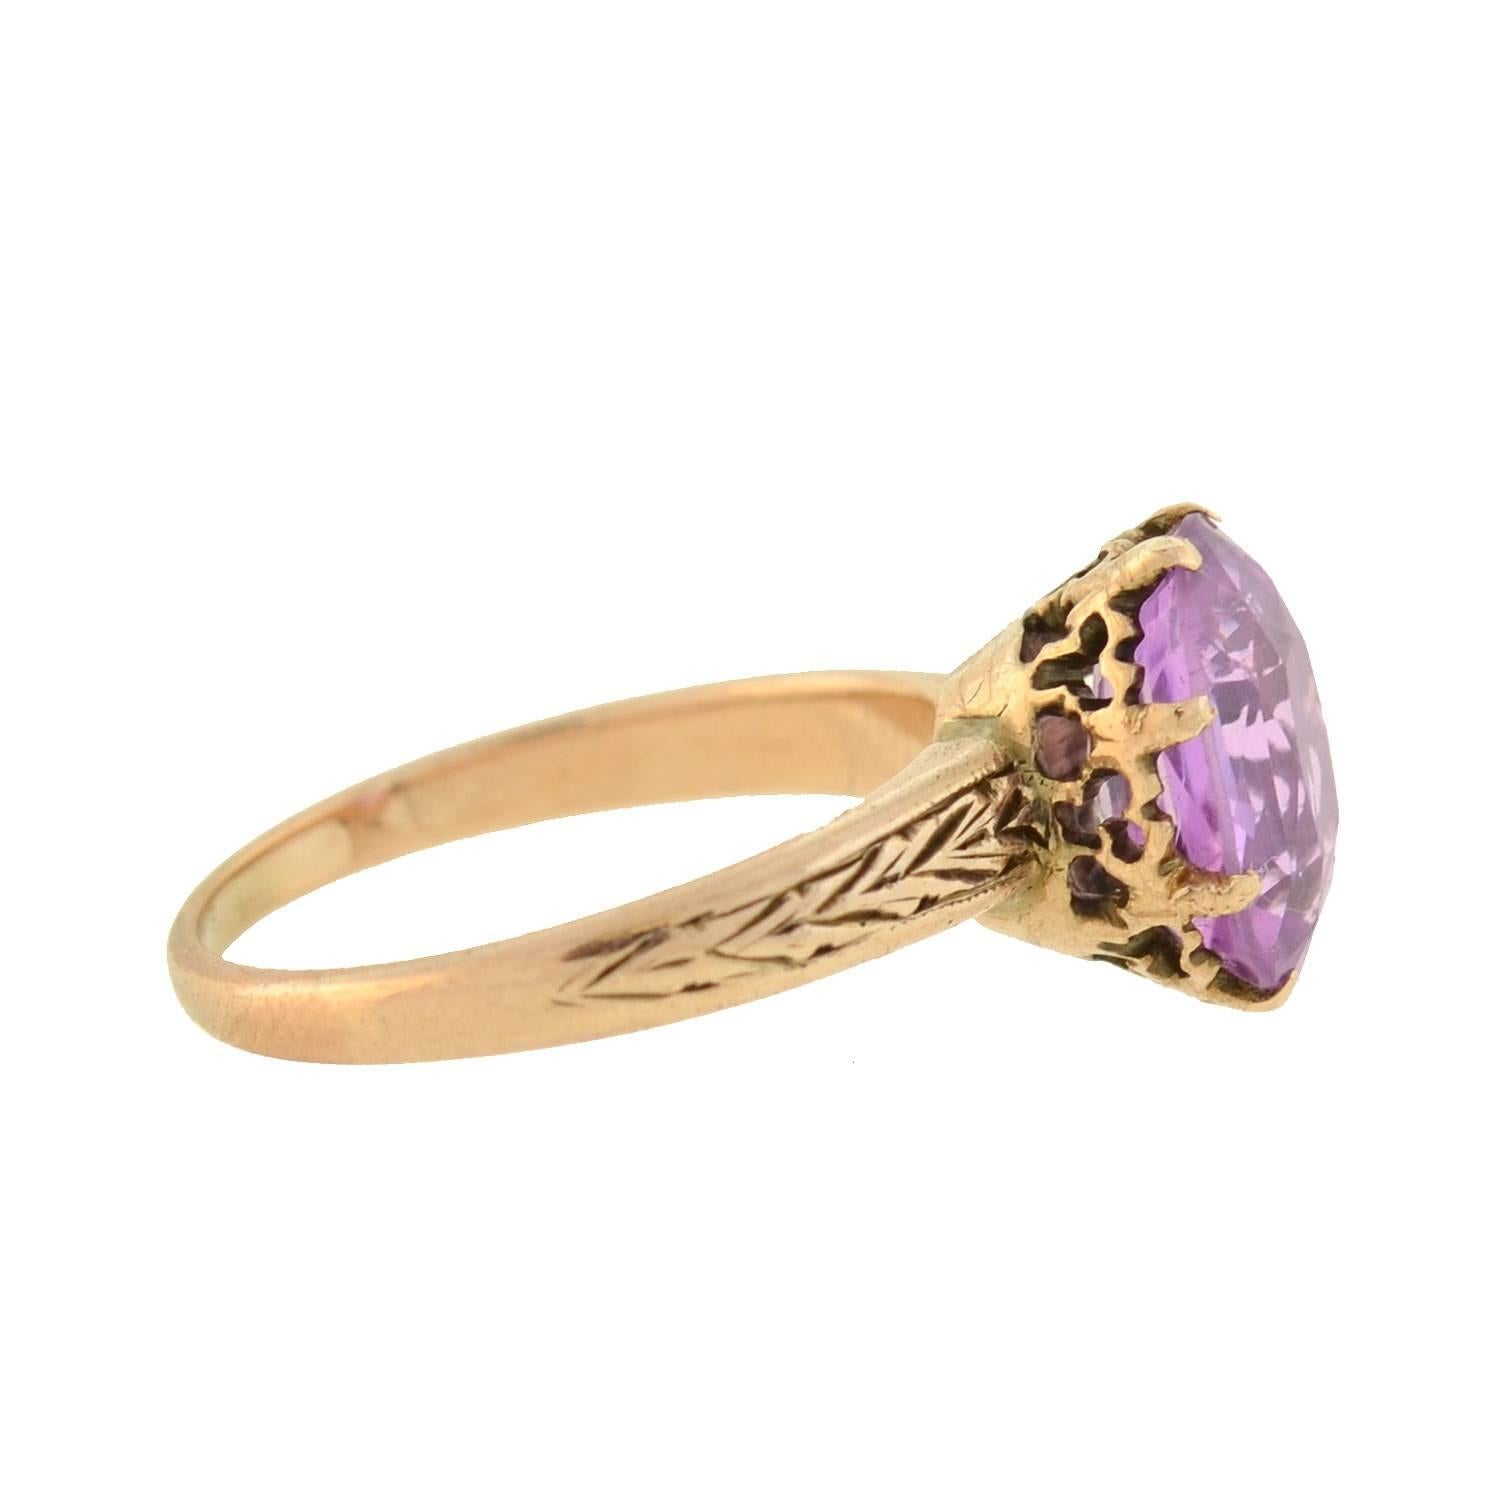 A fantastic pinkish purple sapphire ring from the Victorian (ca1880) era! Beautiful in its simplicity, this solitaire-style ring is crafted in 14kt rosy yellow gold and features a natural pinkish purple sapphire at the center. The stone, which rests